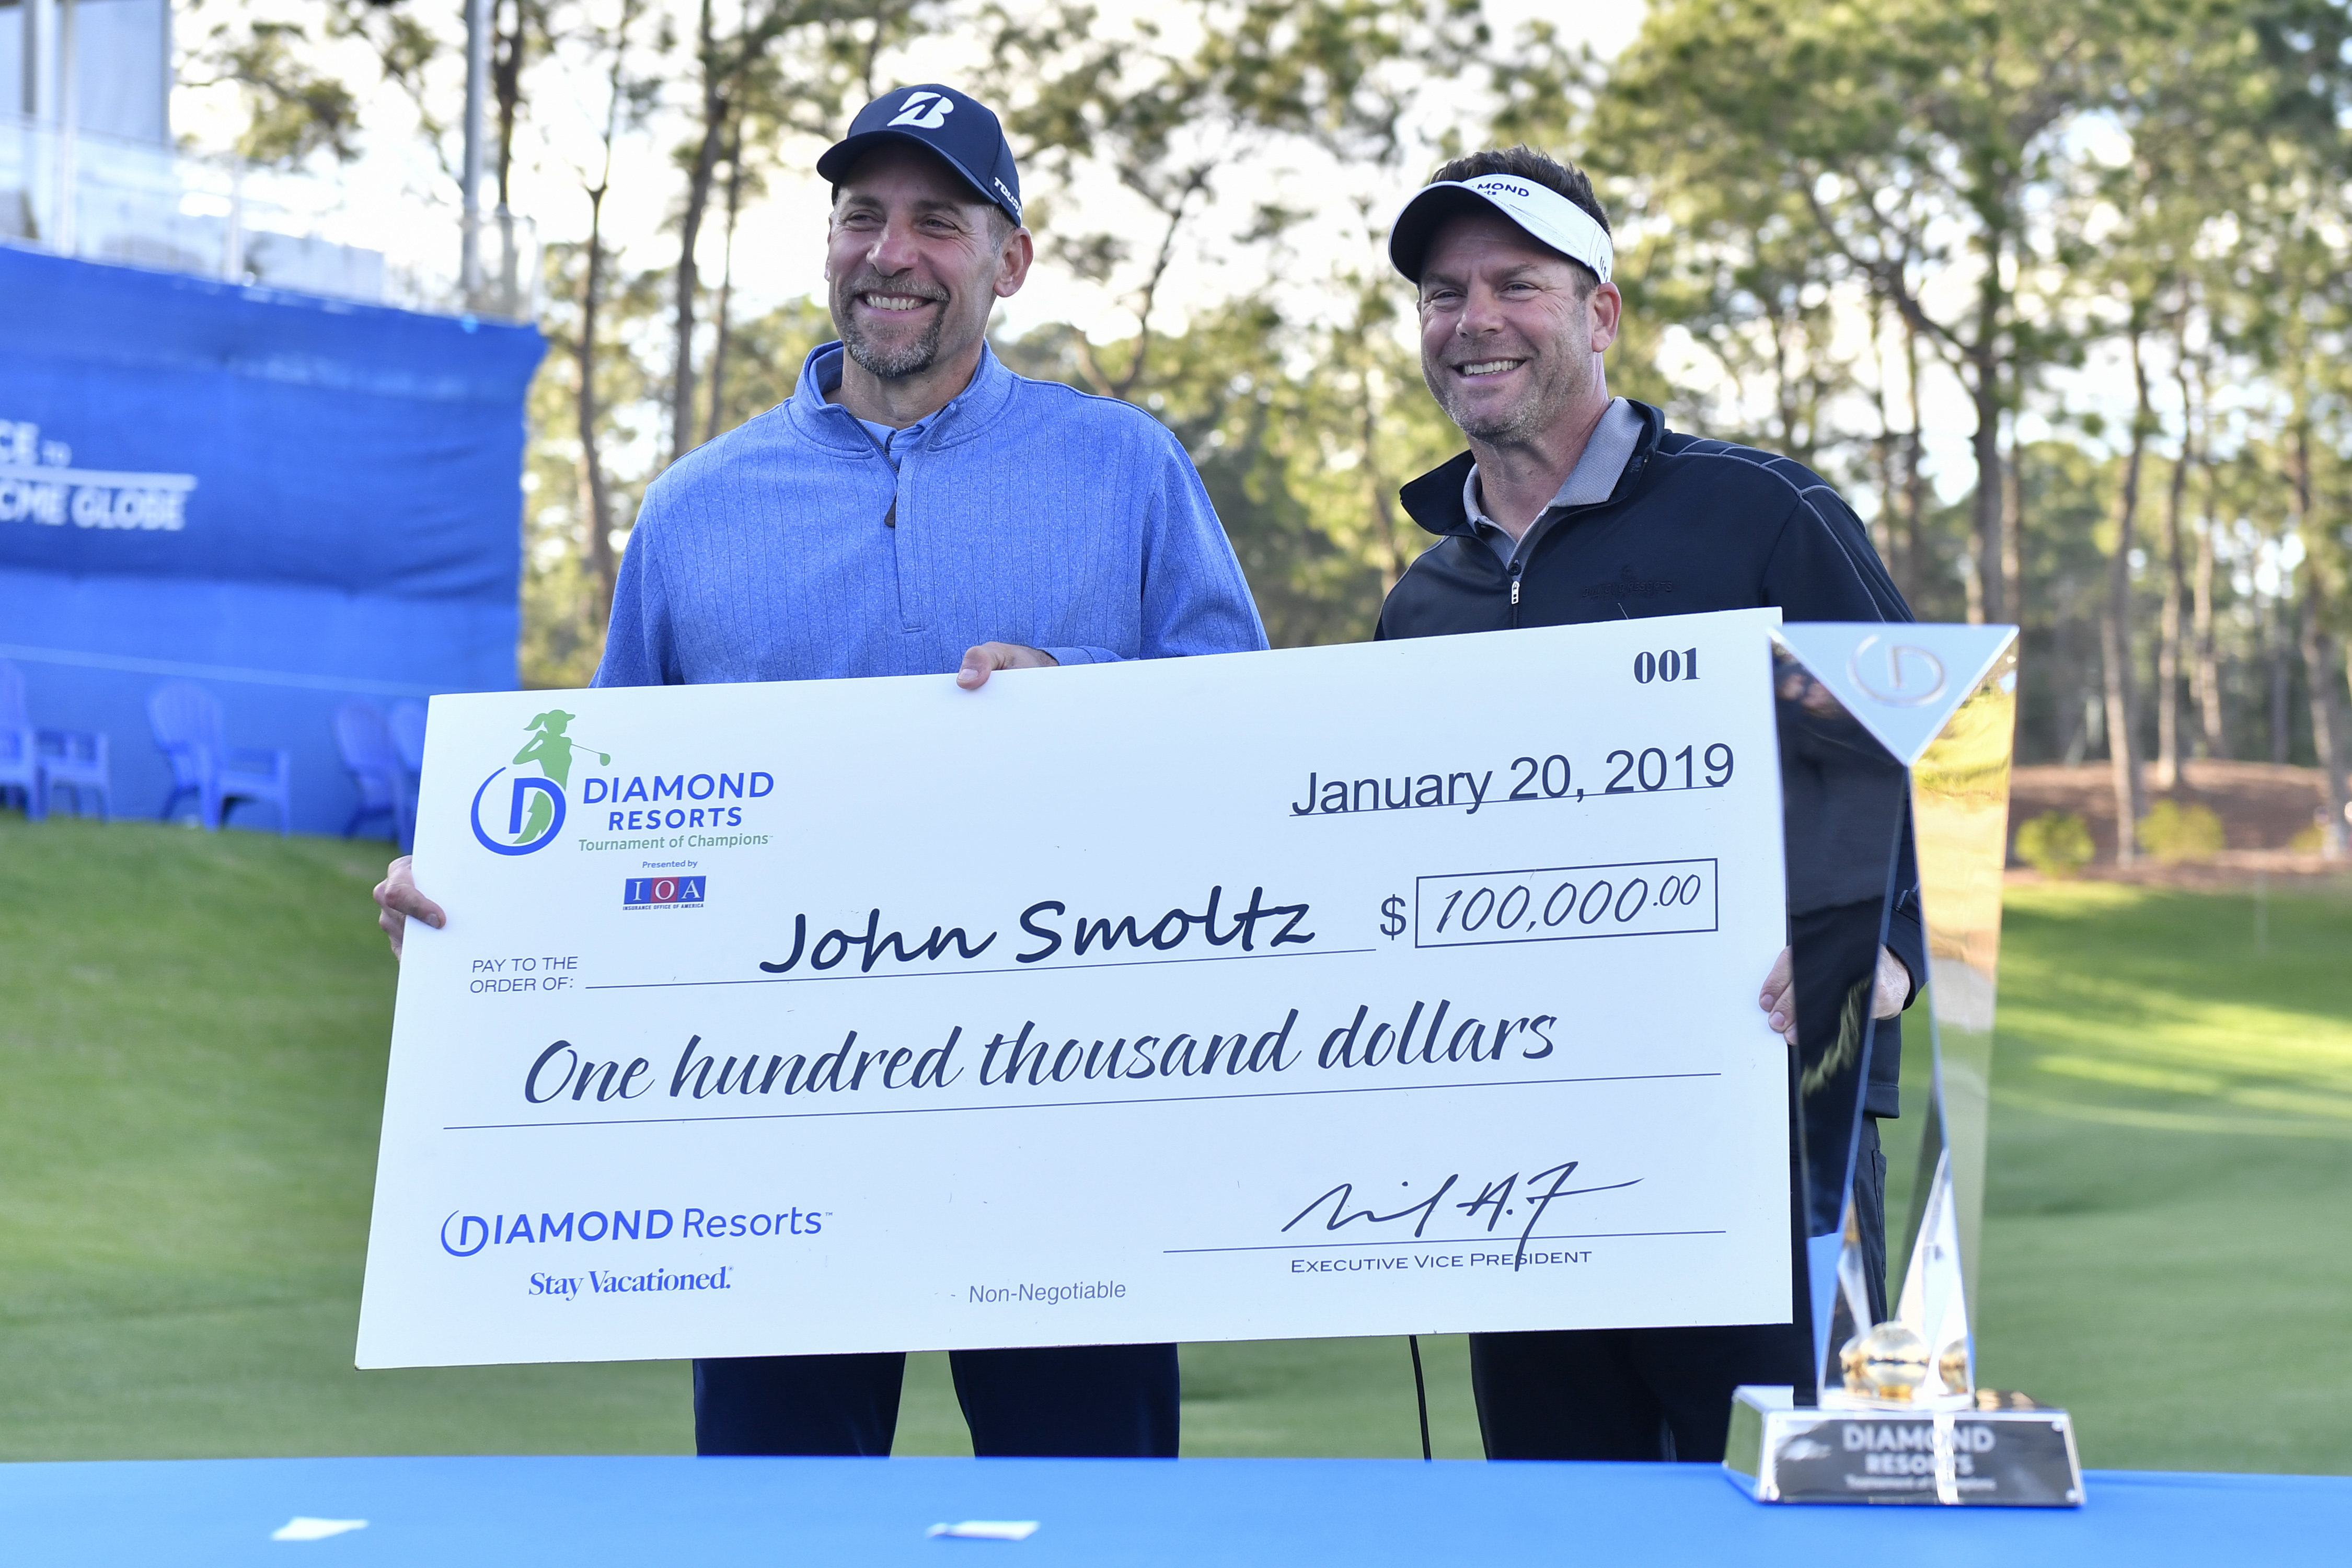 Smoltz trying to make the cut in golf